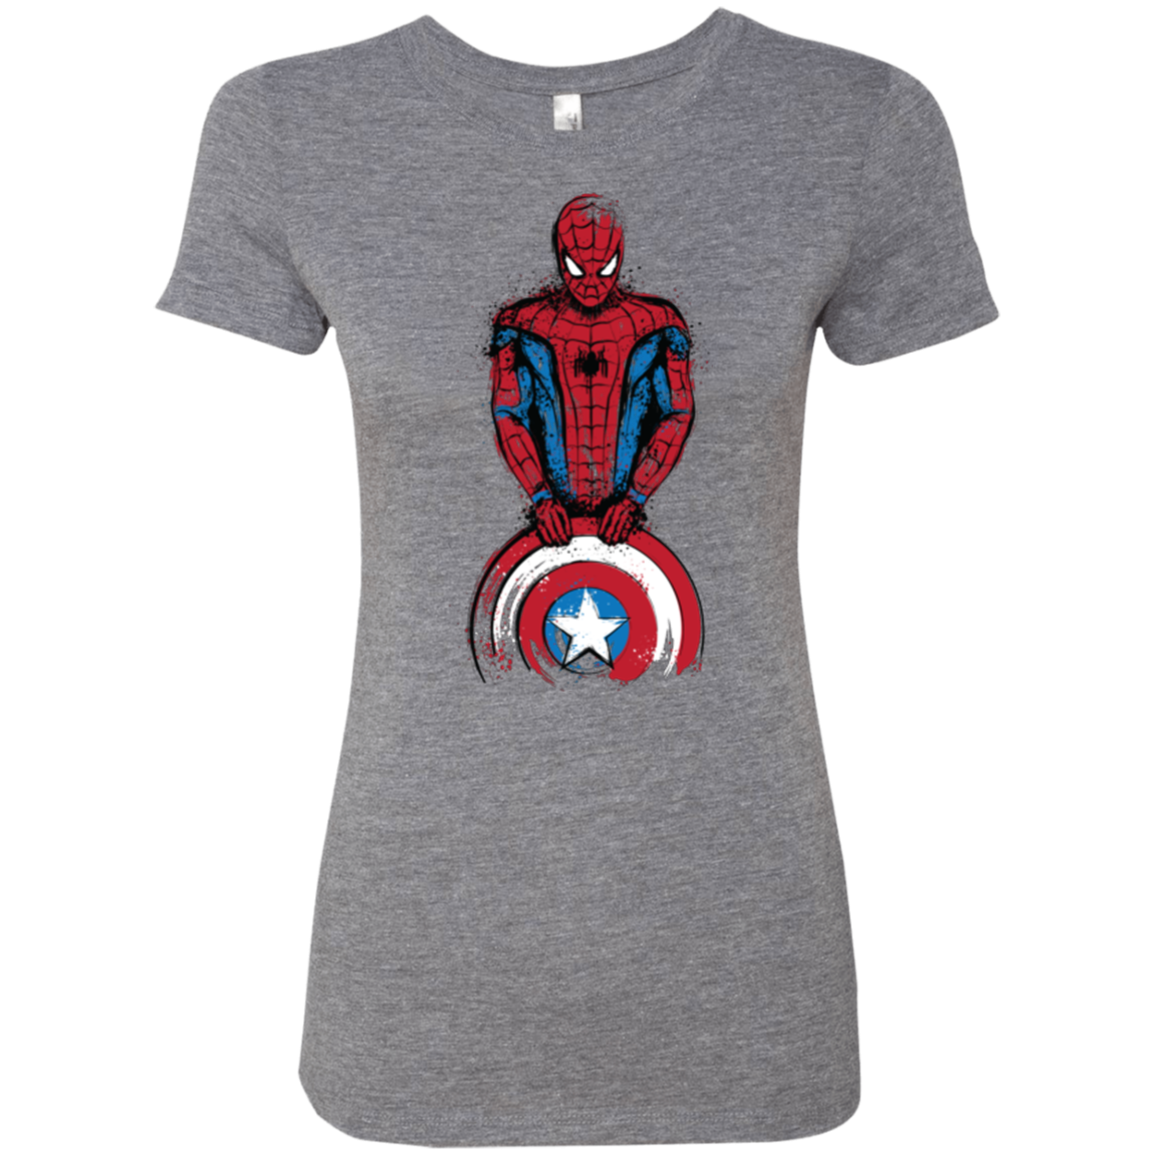 The Spider is Coming Women's Triblend T-Shirt